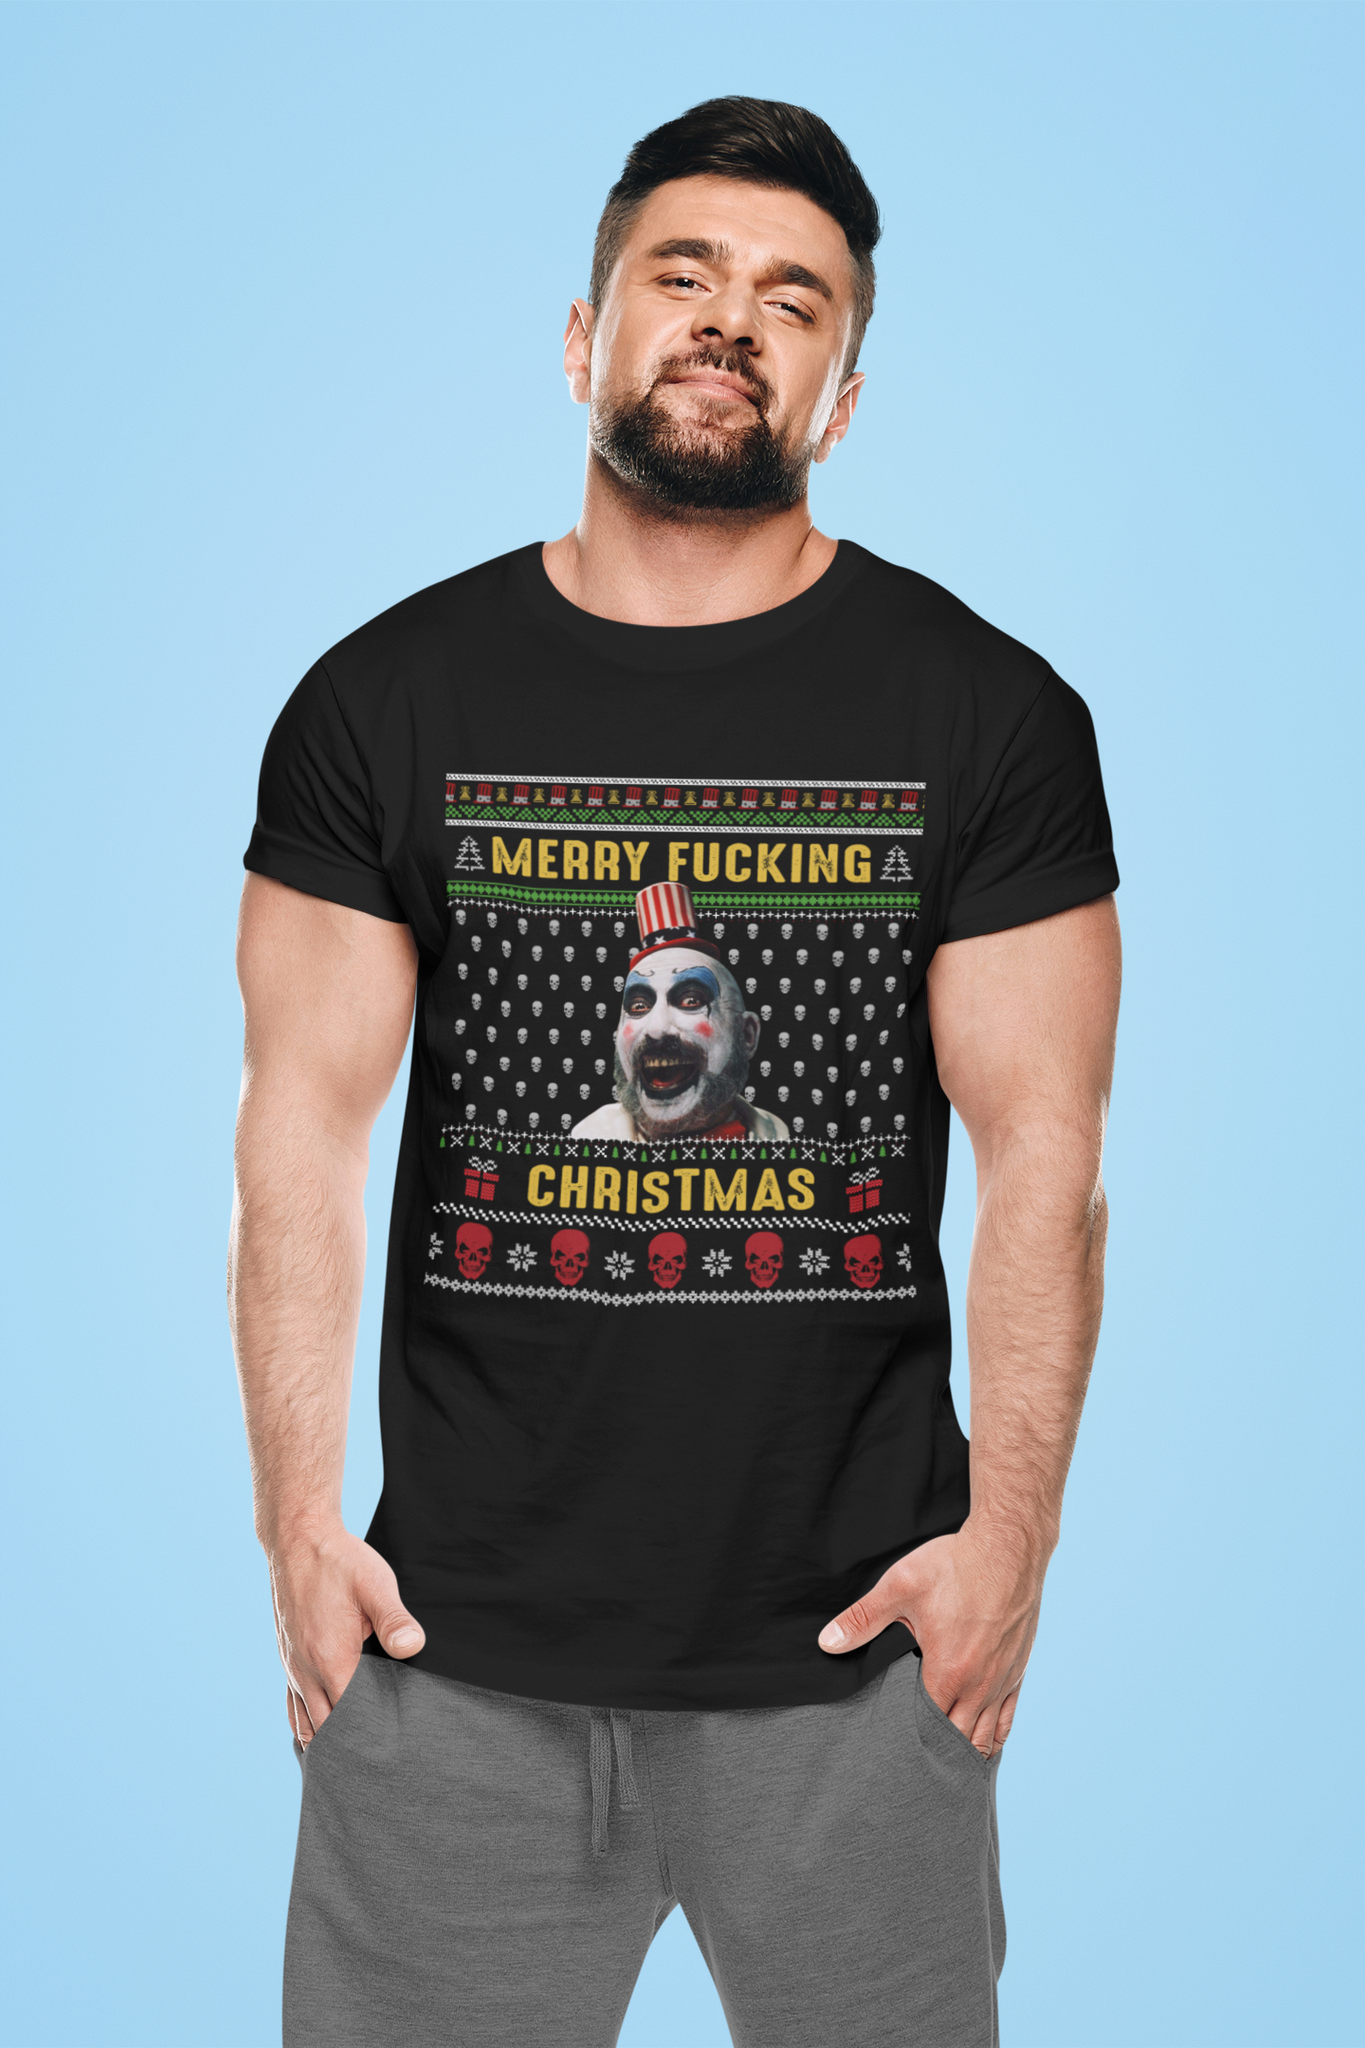 House Of 1000 Corpses Ugly Sweater Shirt, Merry Fucking Christmas Tshirt, Captain Spaulding T Shirt, Halloween Gifts, Christmas Gifts